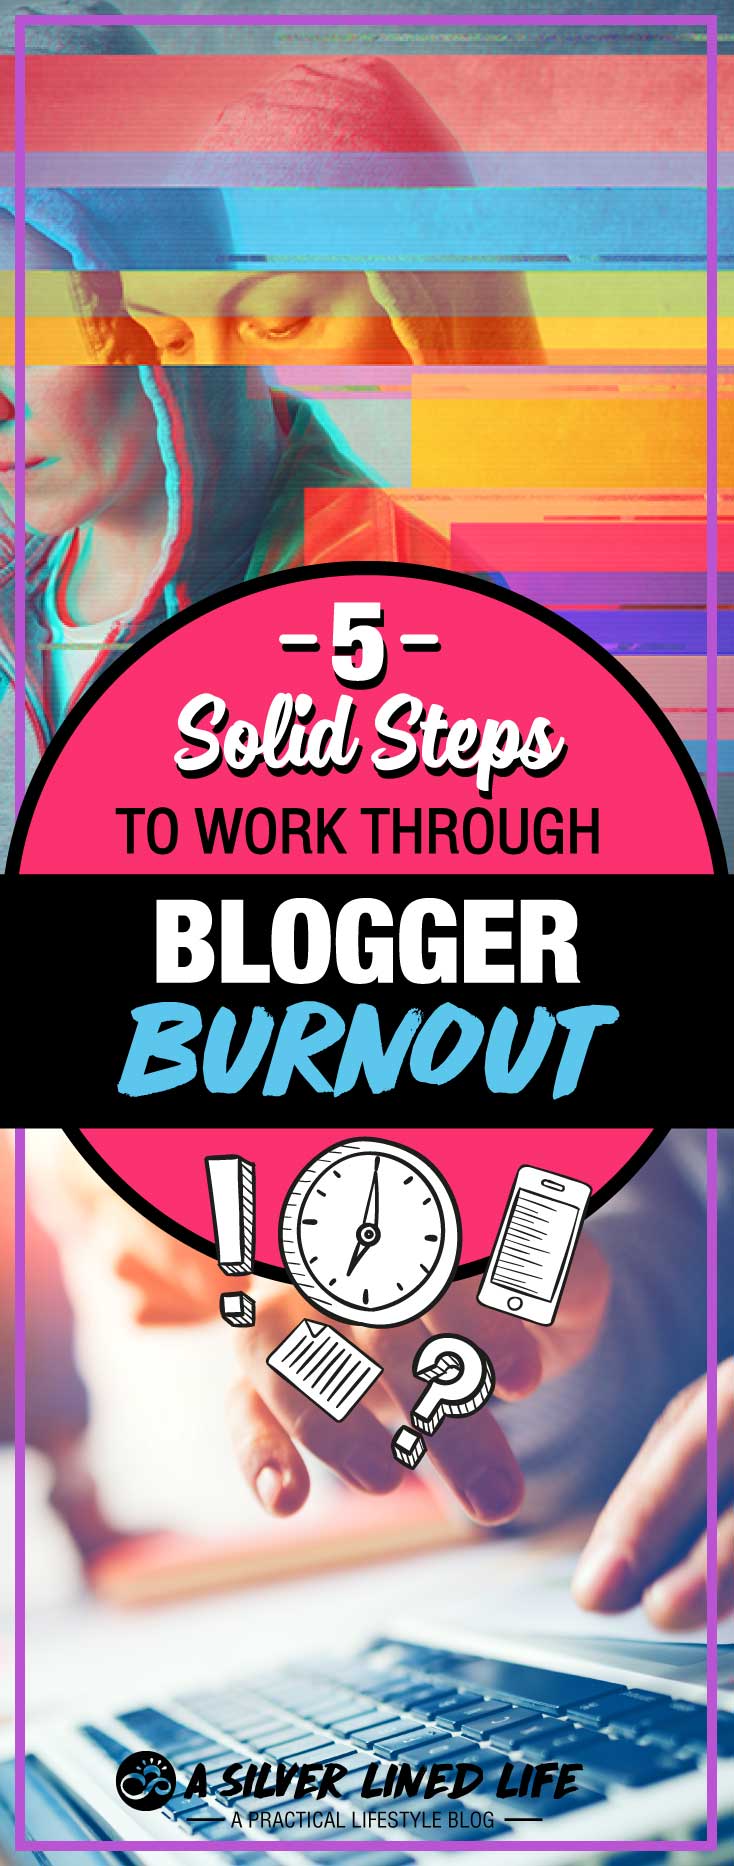 5 tips to avoid blogger burnout and work through it! An awesome blog post for beginners who are starting a blog, those who blog for money or for bloggers who are just burning out. These 5 straight to the point ideas and tips will help motivate you and give you inspiration to move forward and get out of that rut!